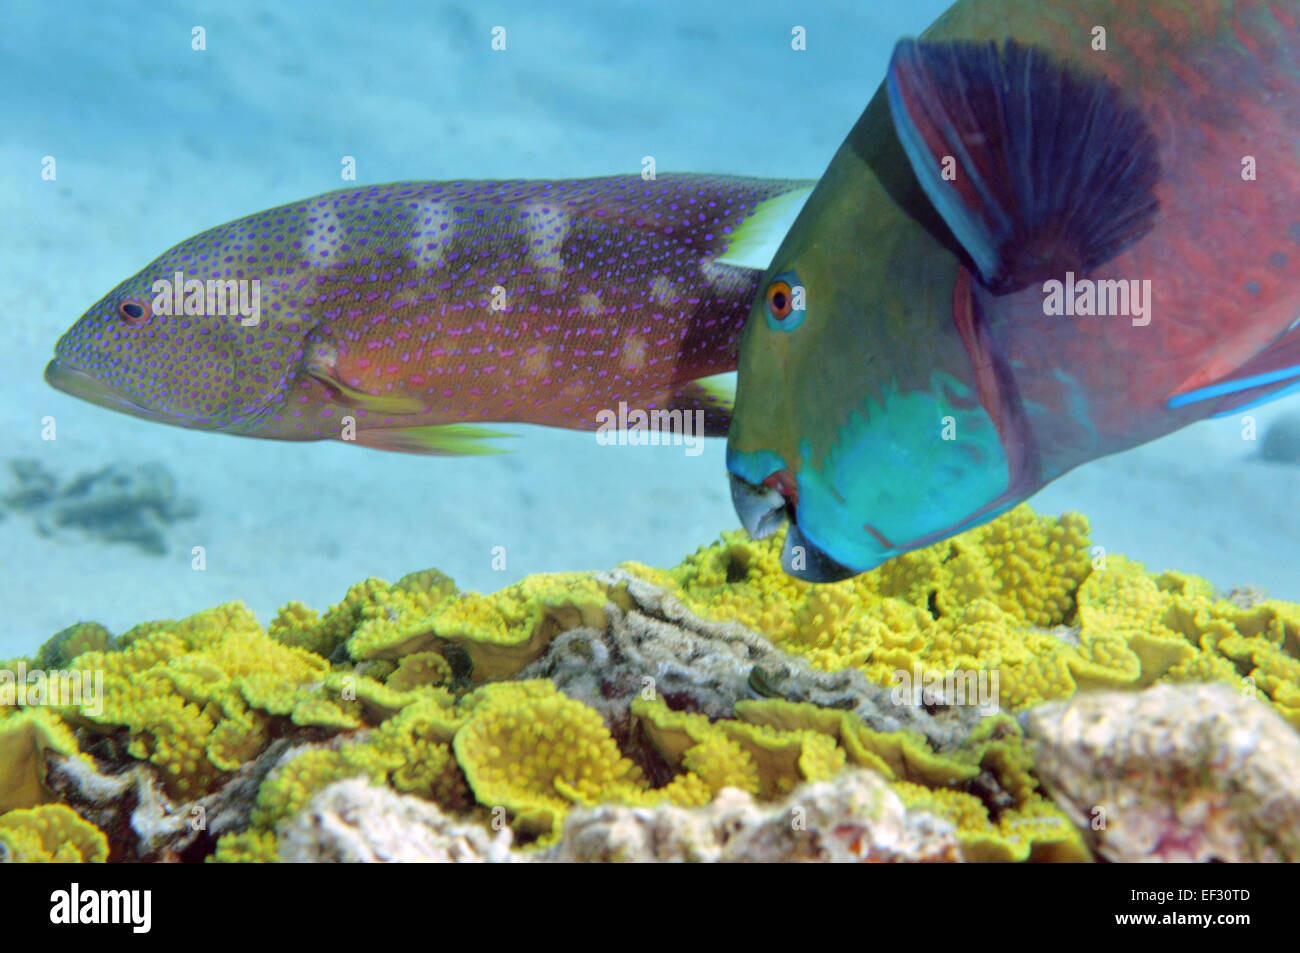 Red Sea steephead parrotfish, Chlorurus gibbus,  and Yellow-edged lyretail grouper, Variola louti swimming in background, Eilat, Stock Photo